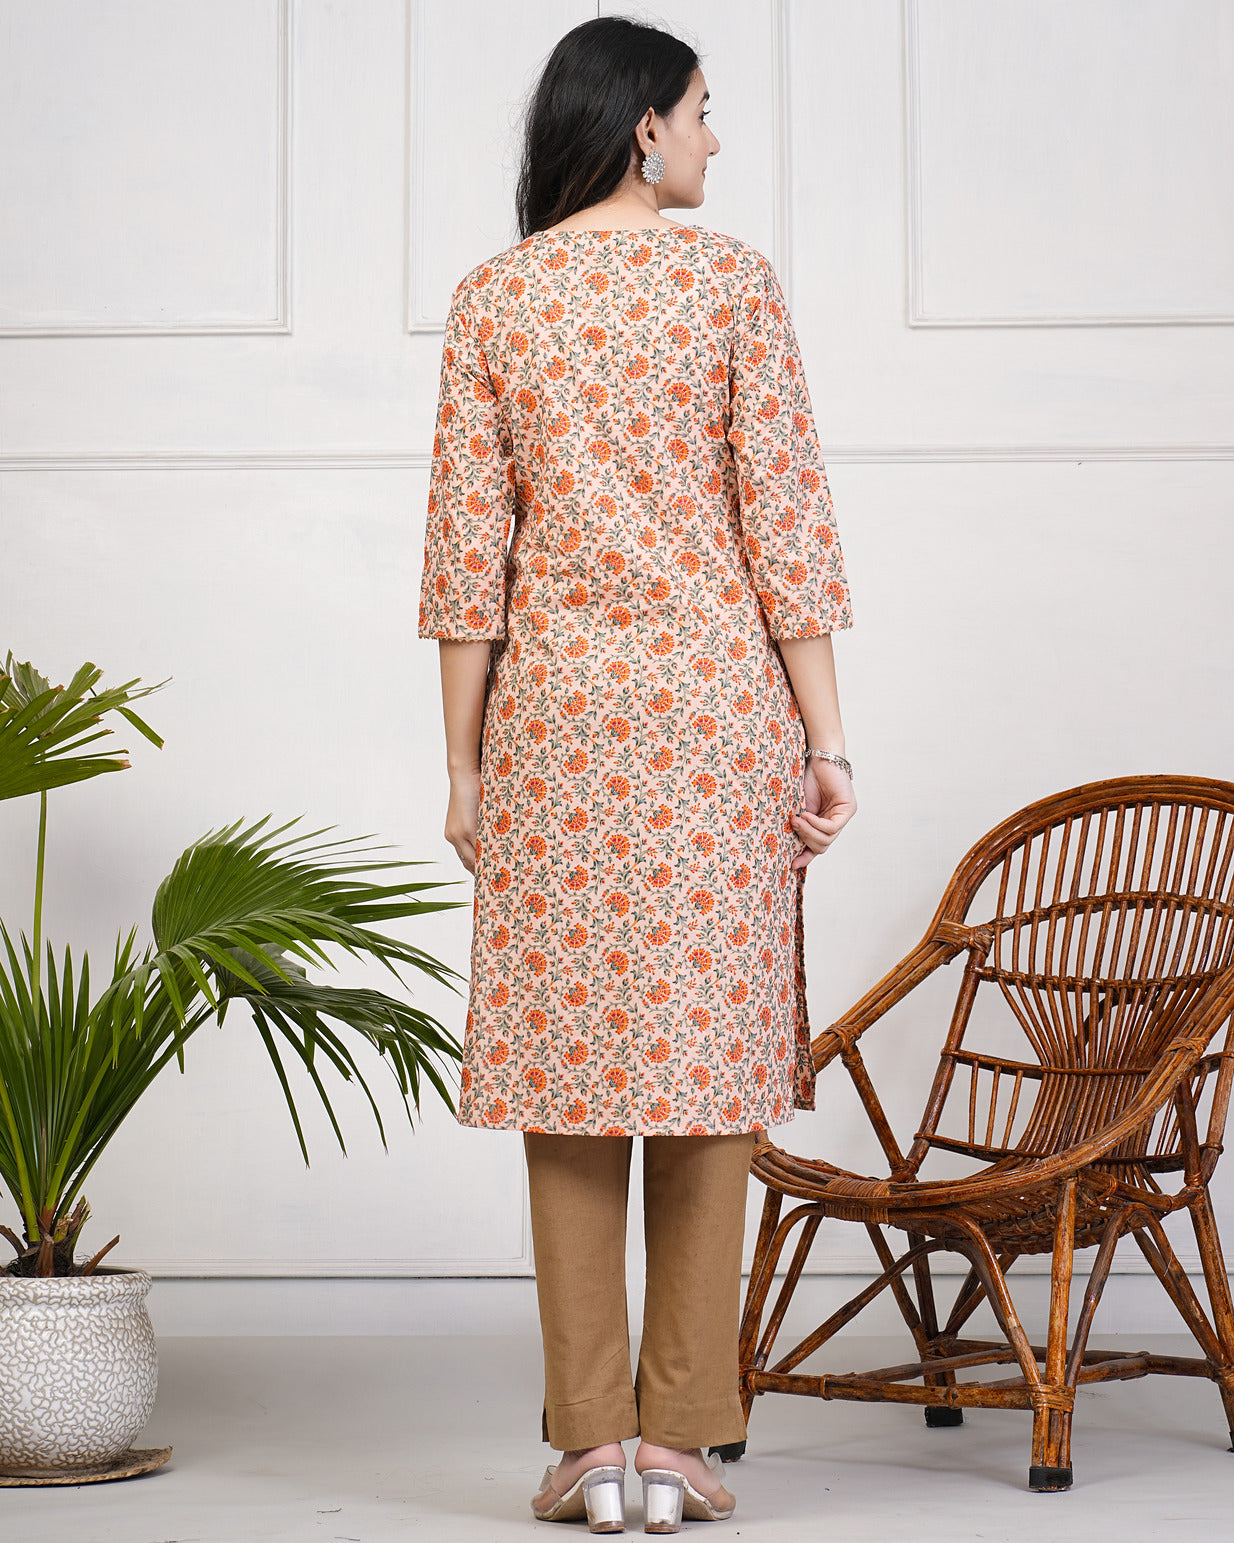 Peach Floral Print with Gold Embroidery Cotton Kurti